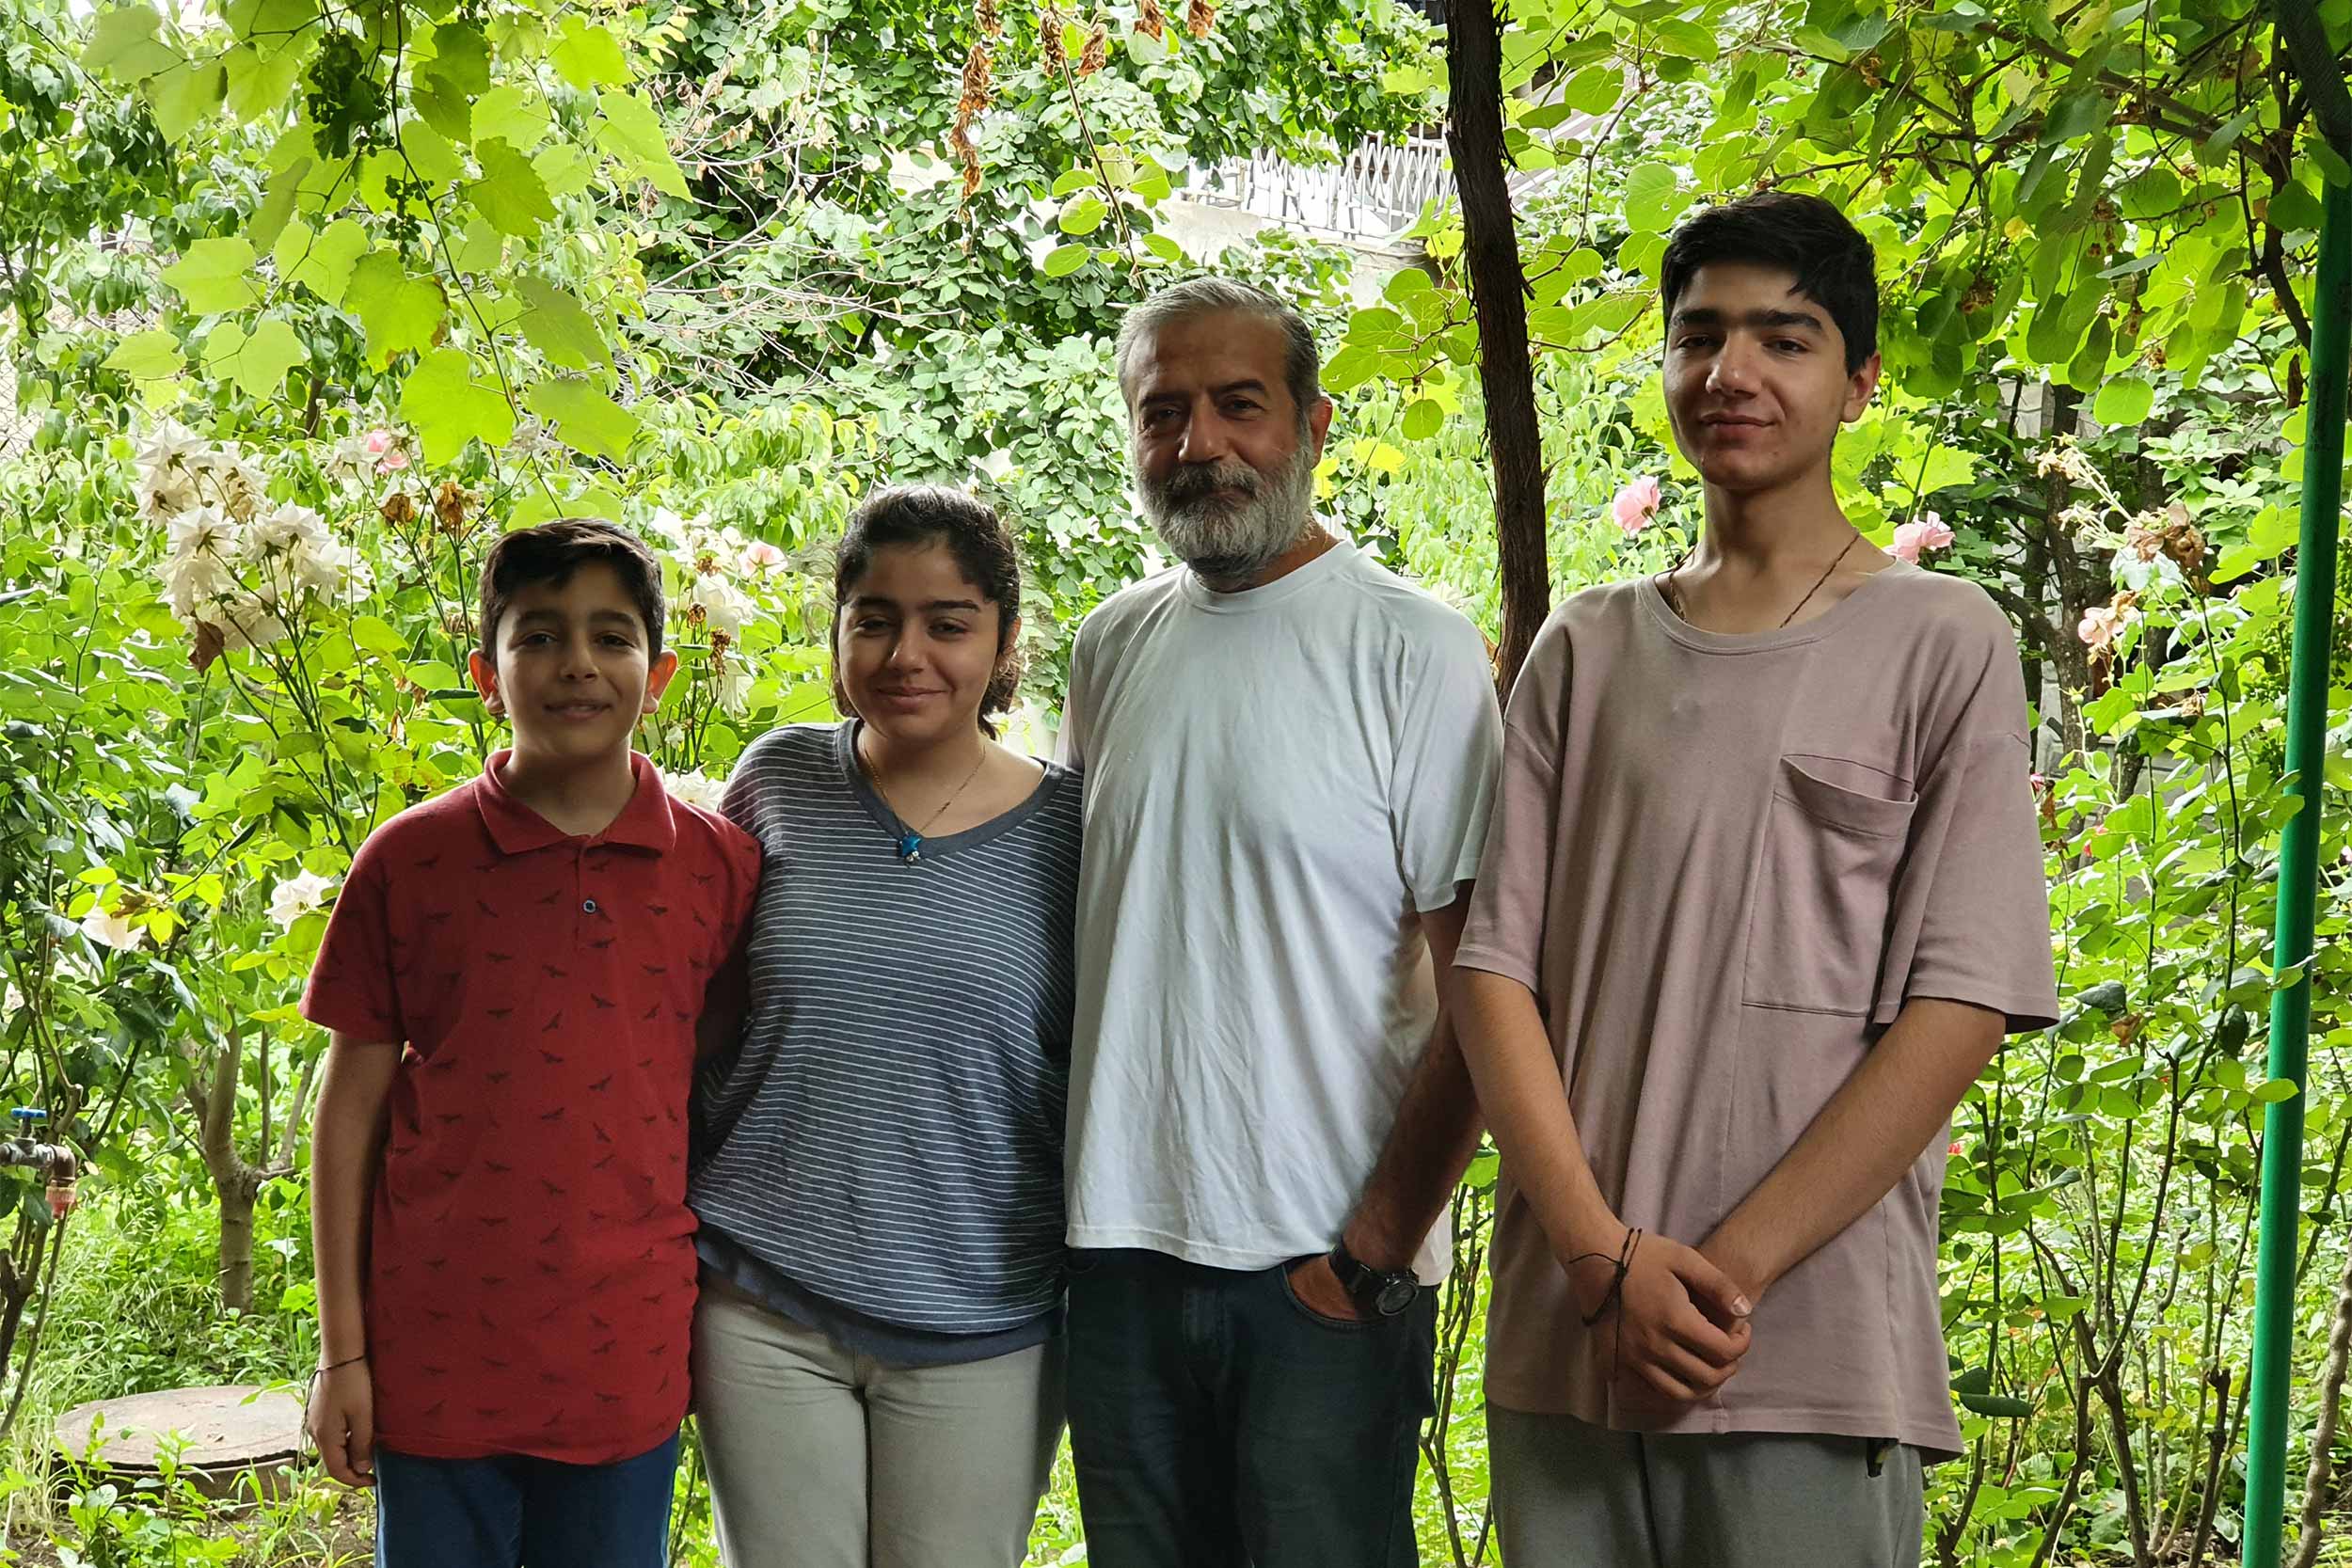 Hovik, his wife Isabel and their three children arrived in Stepanakert from their native Aleppo in Syria in 2012. © Arshaluis Mghdesyan/IWPR